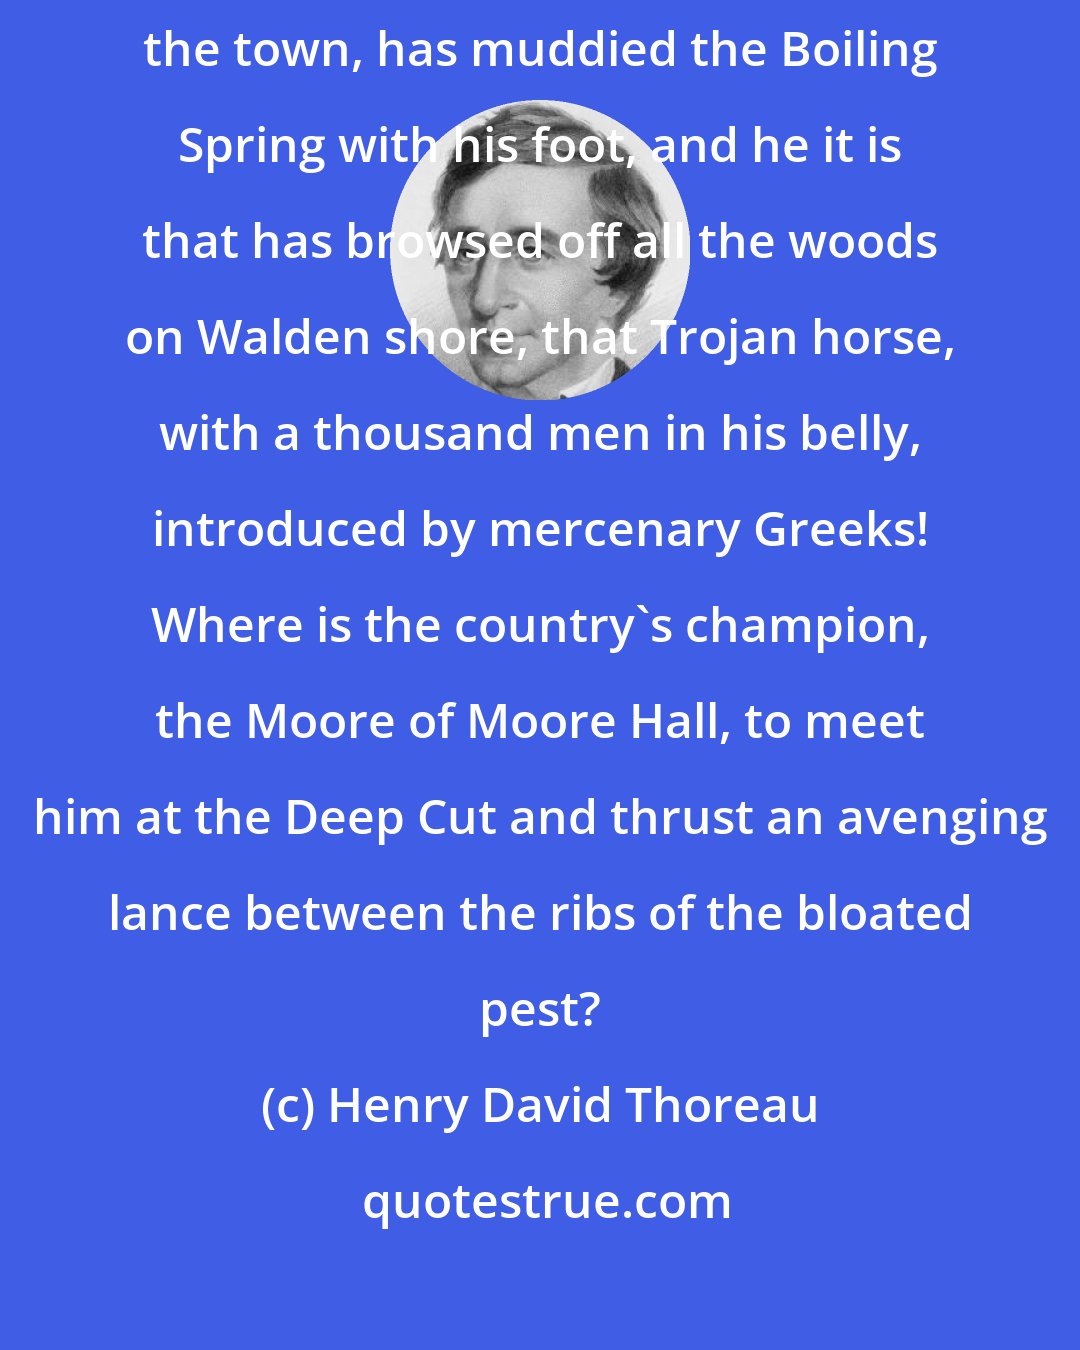 Henry David Thoreau: That devilish Iron Horse, whose ear-rending neigh is heard throughout the town, has muddied the Boiling Spring with his foot, and he it is that has browsed off all the woods on Walden shore, that Trojan horse, with a thousand men in his belly, introduced by mercenary Greeks! Where is the country's champion, the Moore of Moore Hall, to meet him at the Deep Cut and thrust an avenging lance between the ribs of the bloated pest?